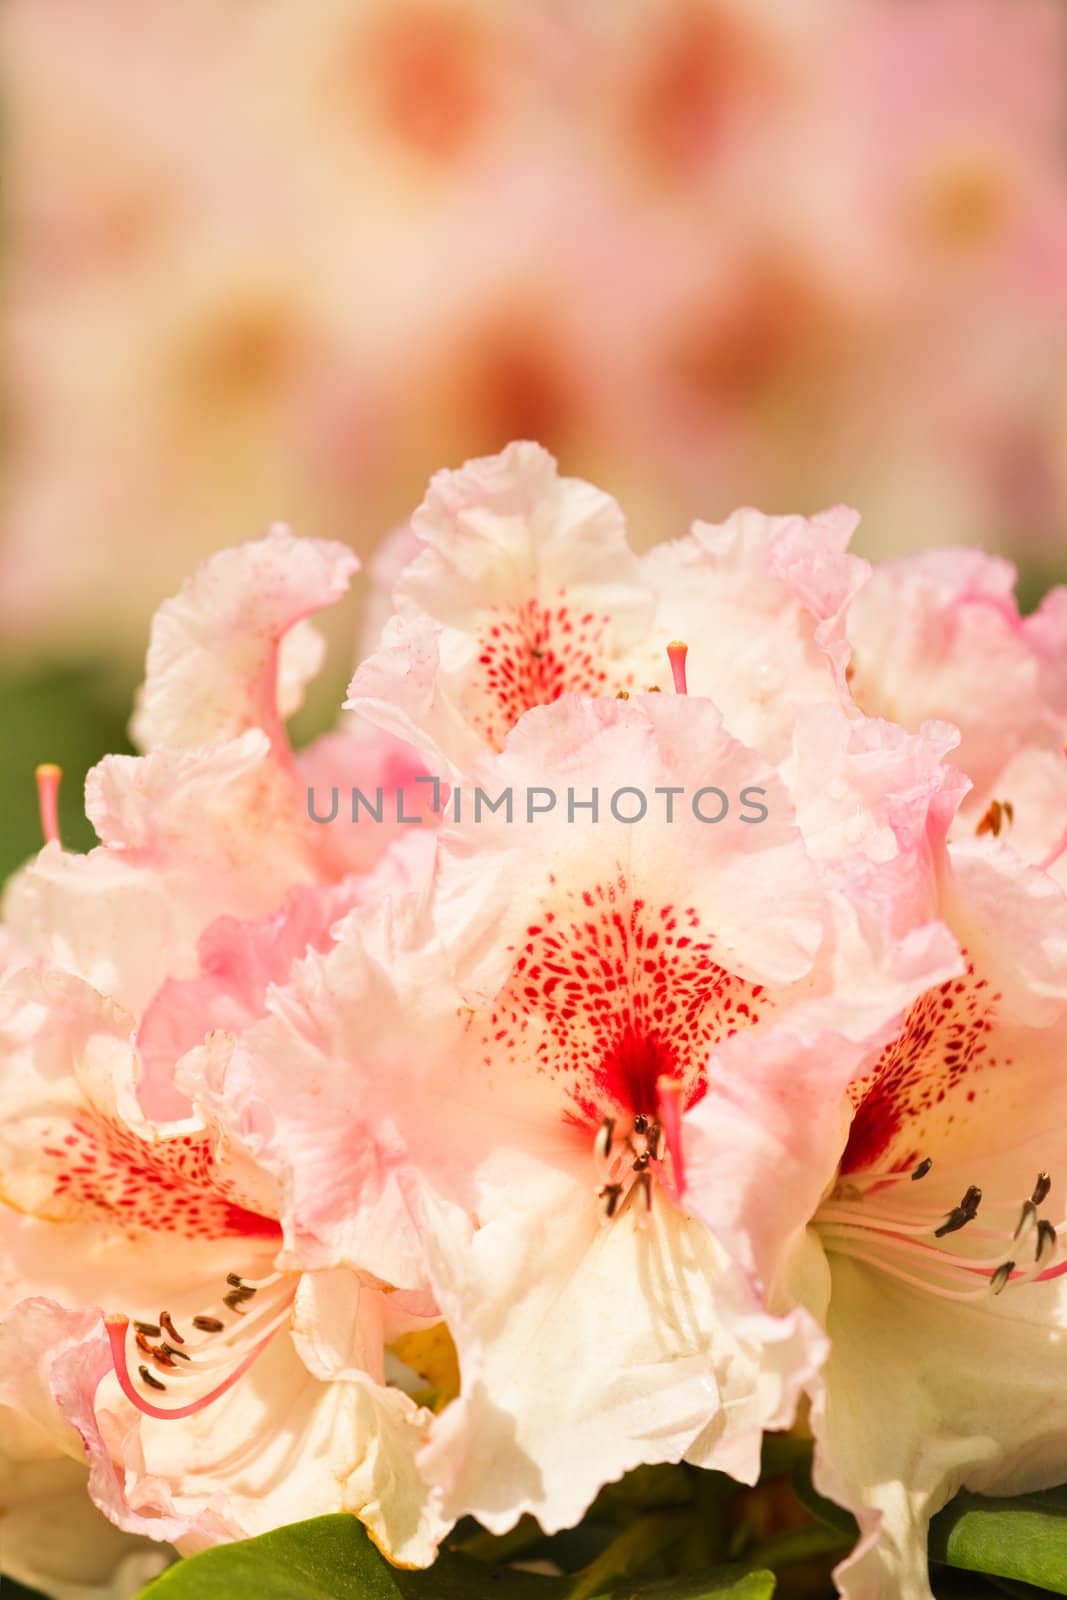 Rhododendron flowers in spring by Colette